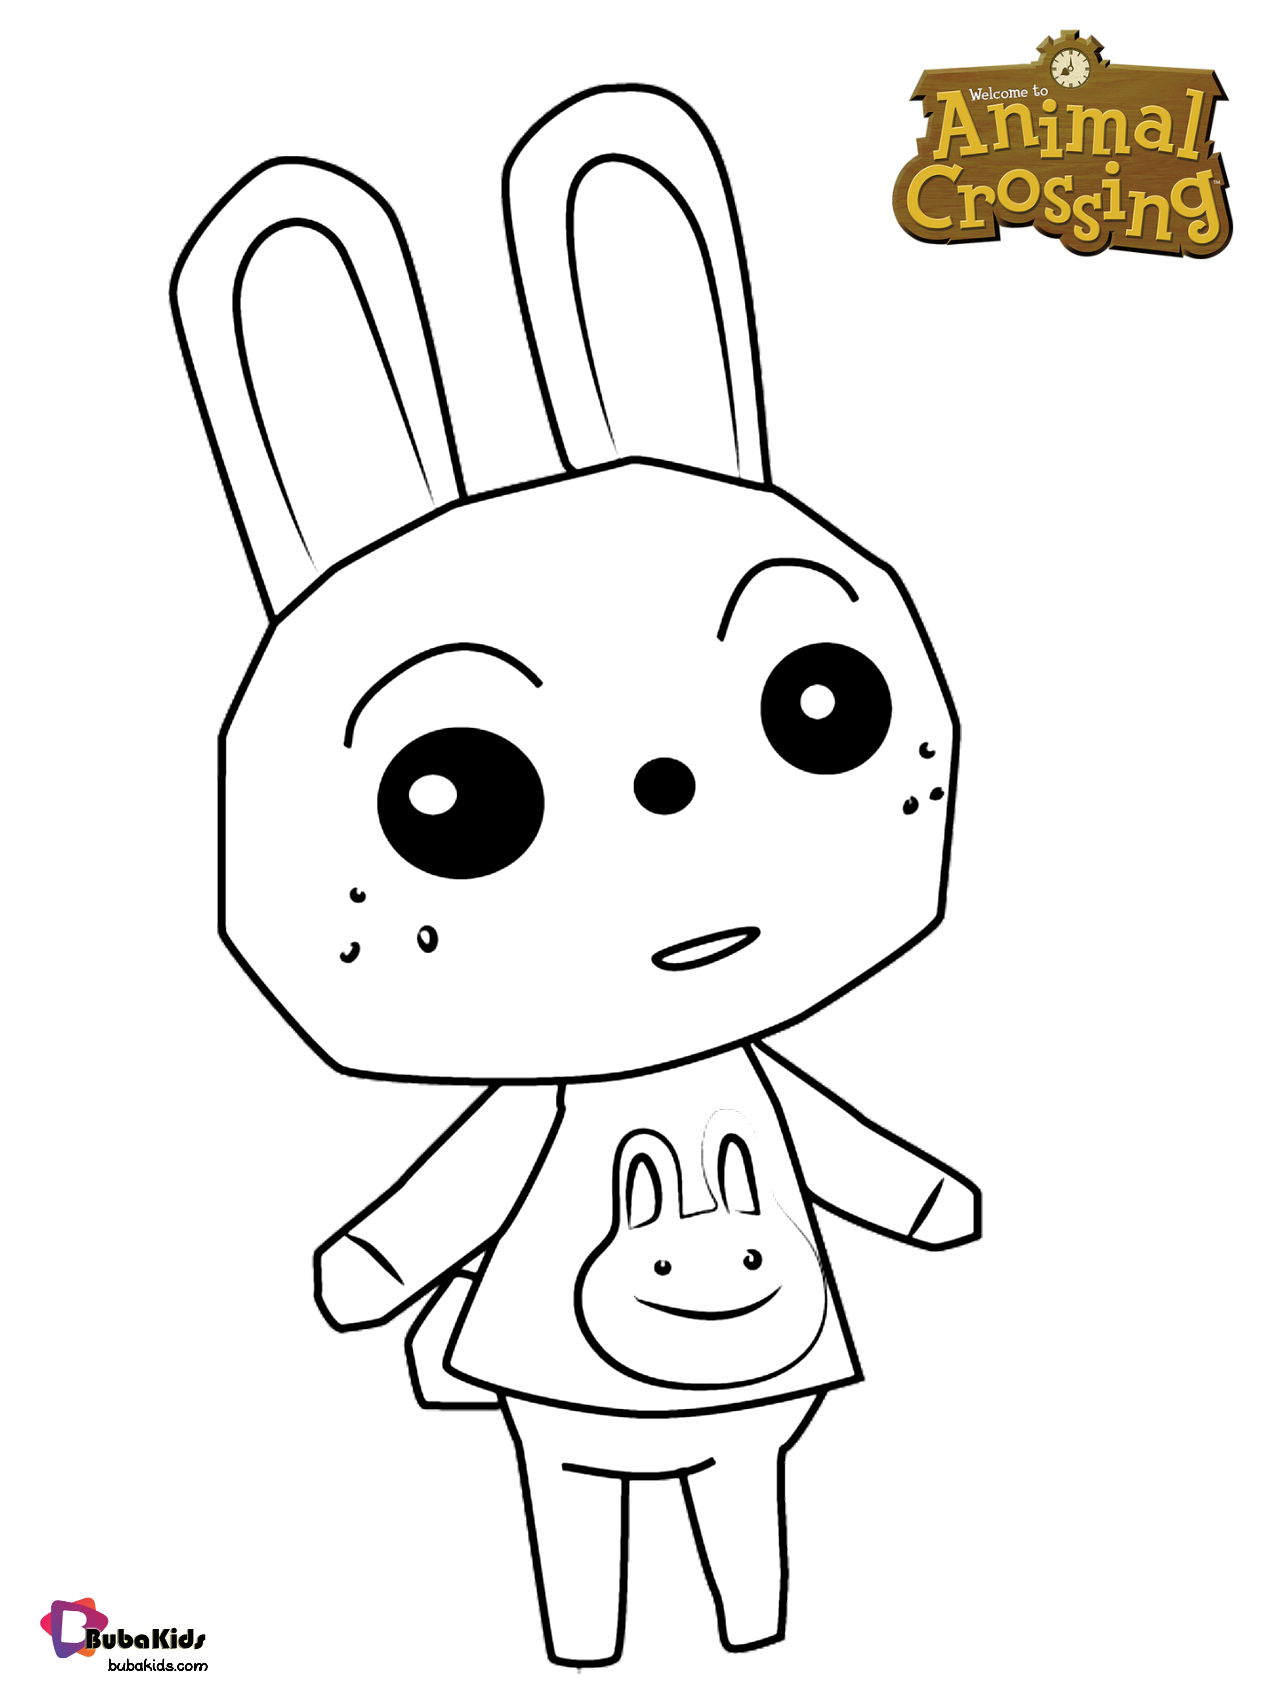 Ruby is a peppy rabbit villager from the Animal Crossing series Wallpaper